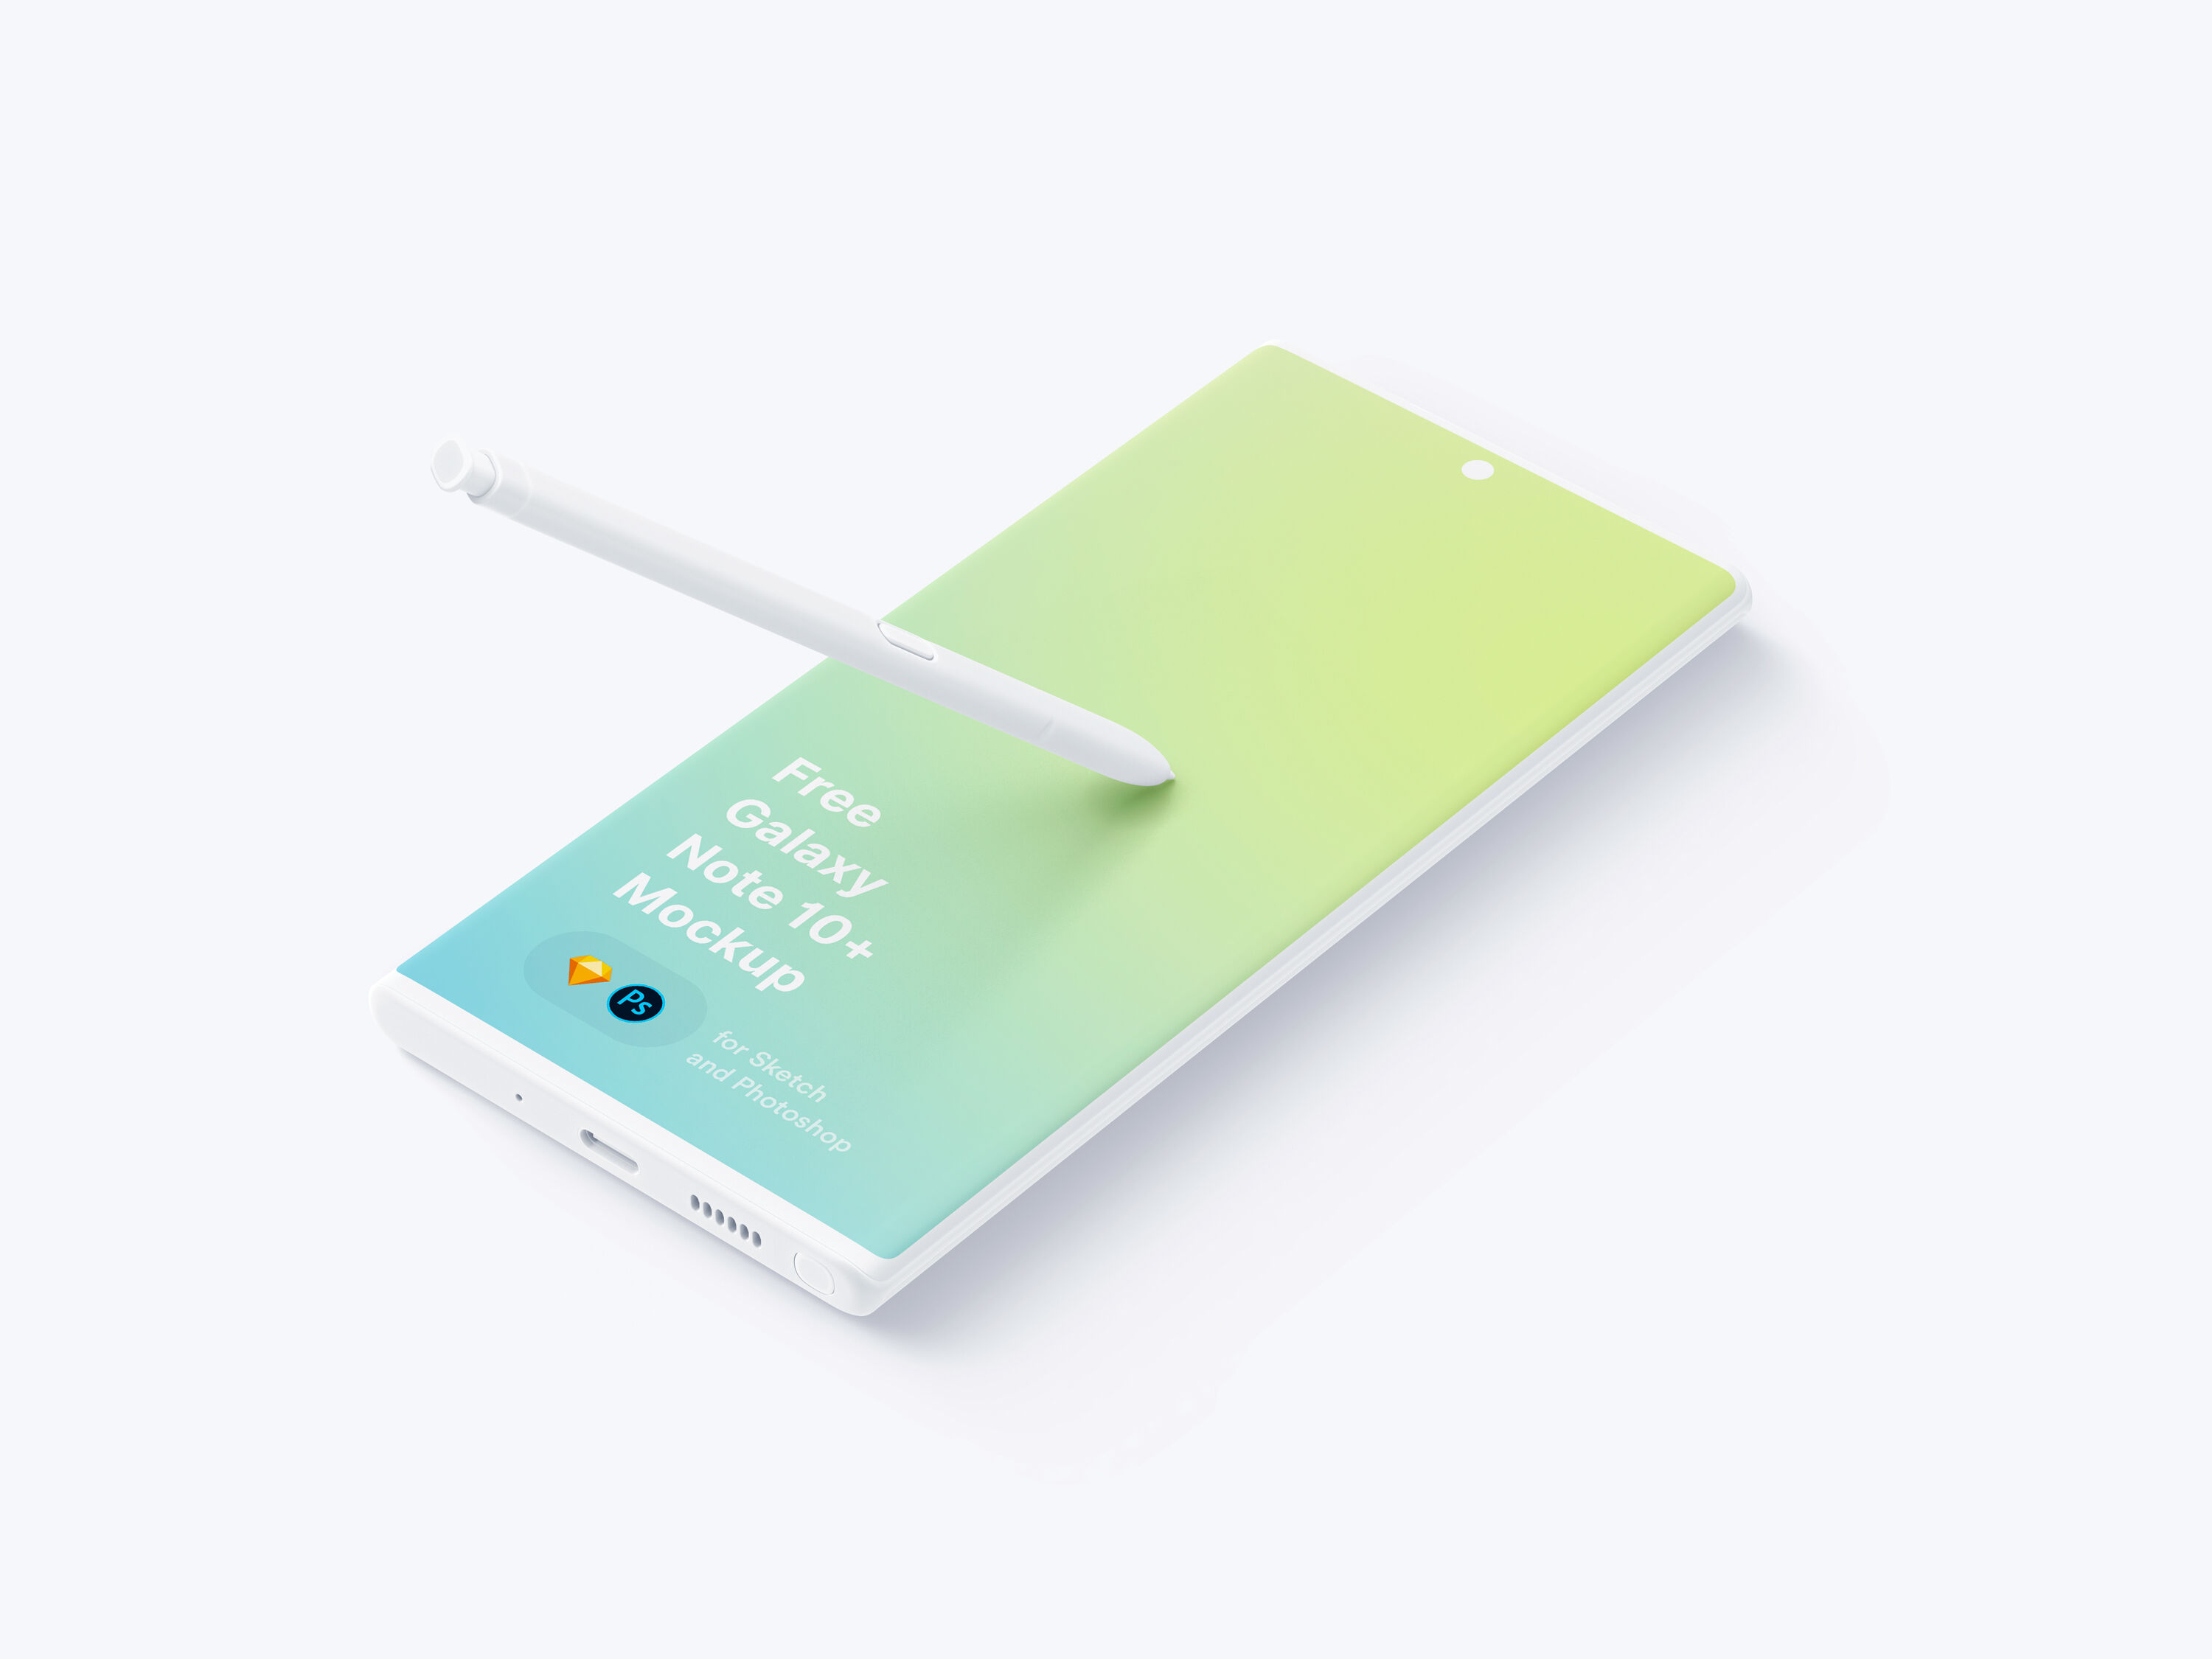 Samsung Galaxy Note 10 Plus with its Pen Mockup FREE PSD